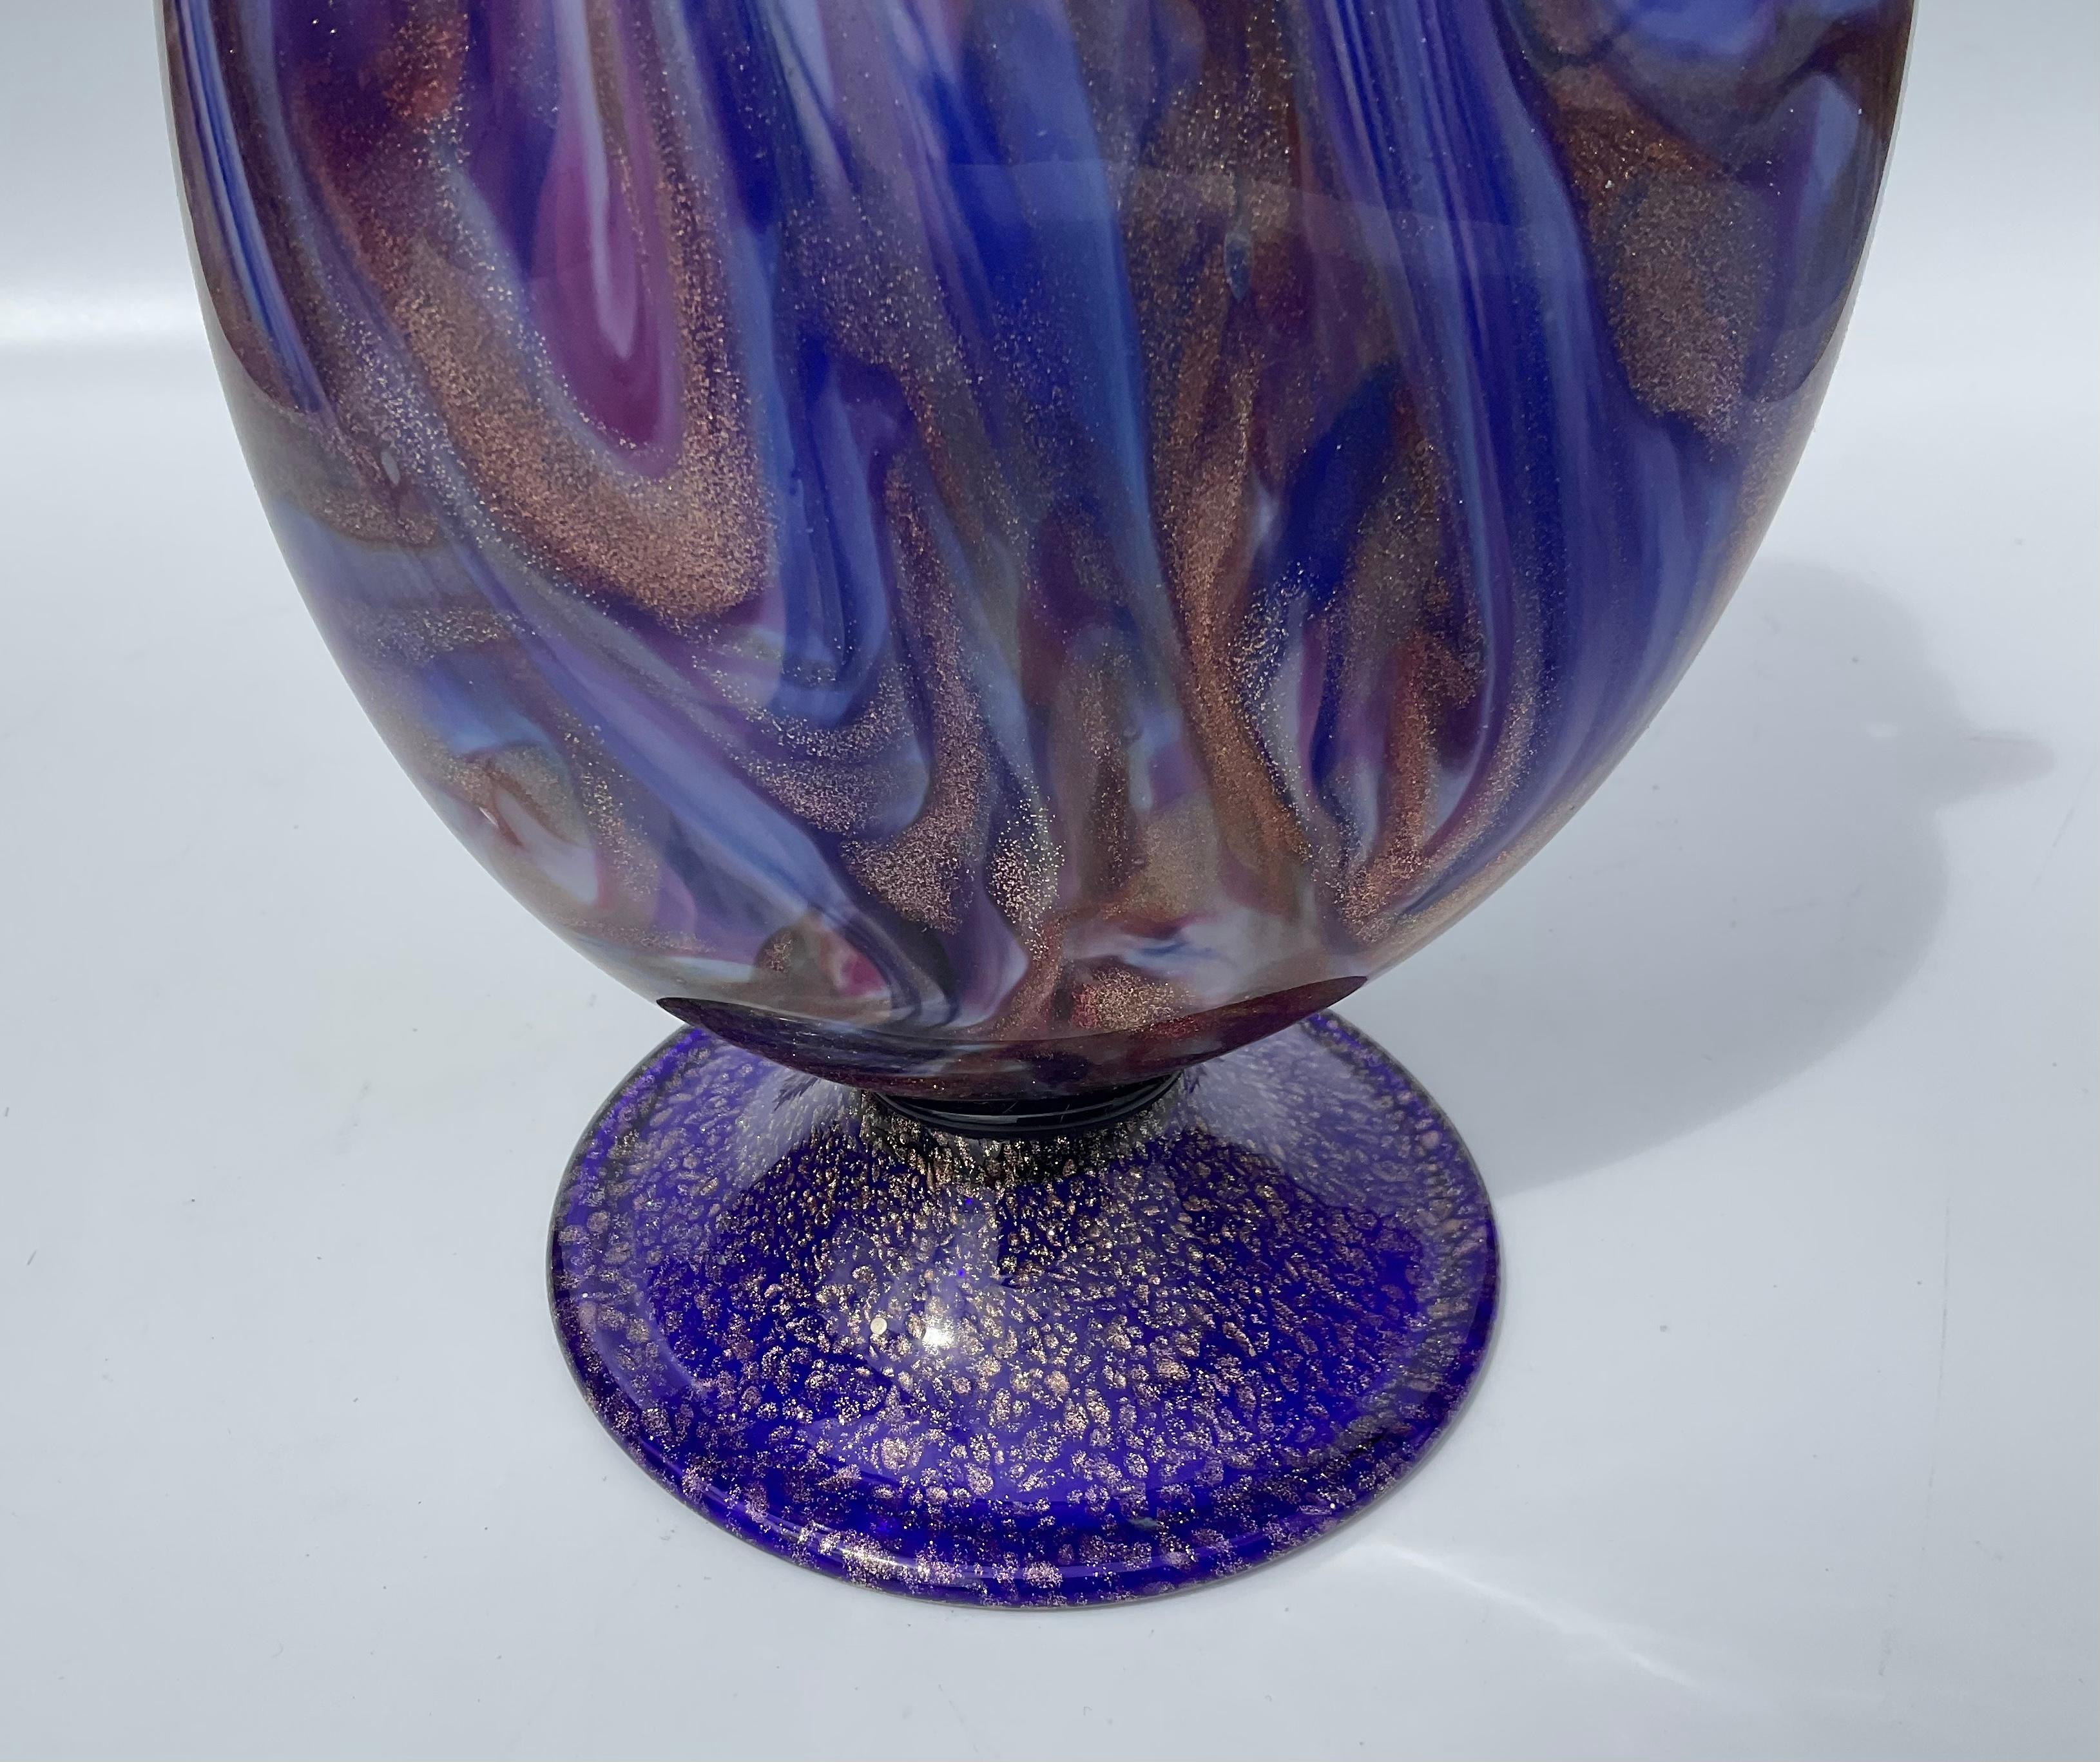 Art Deco Fratelli Toso Murano Art Glass Vase in Blue with Applied Handles and Aventurine For Sale